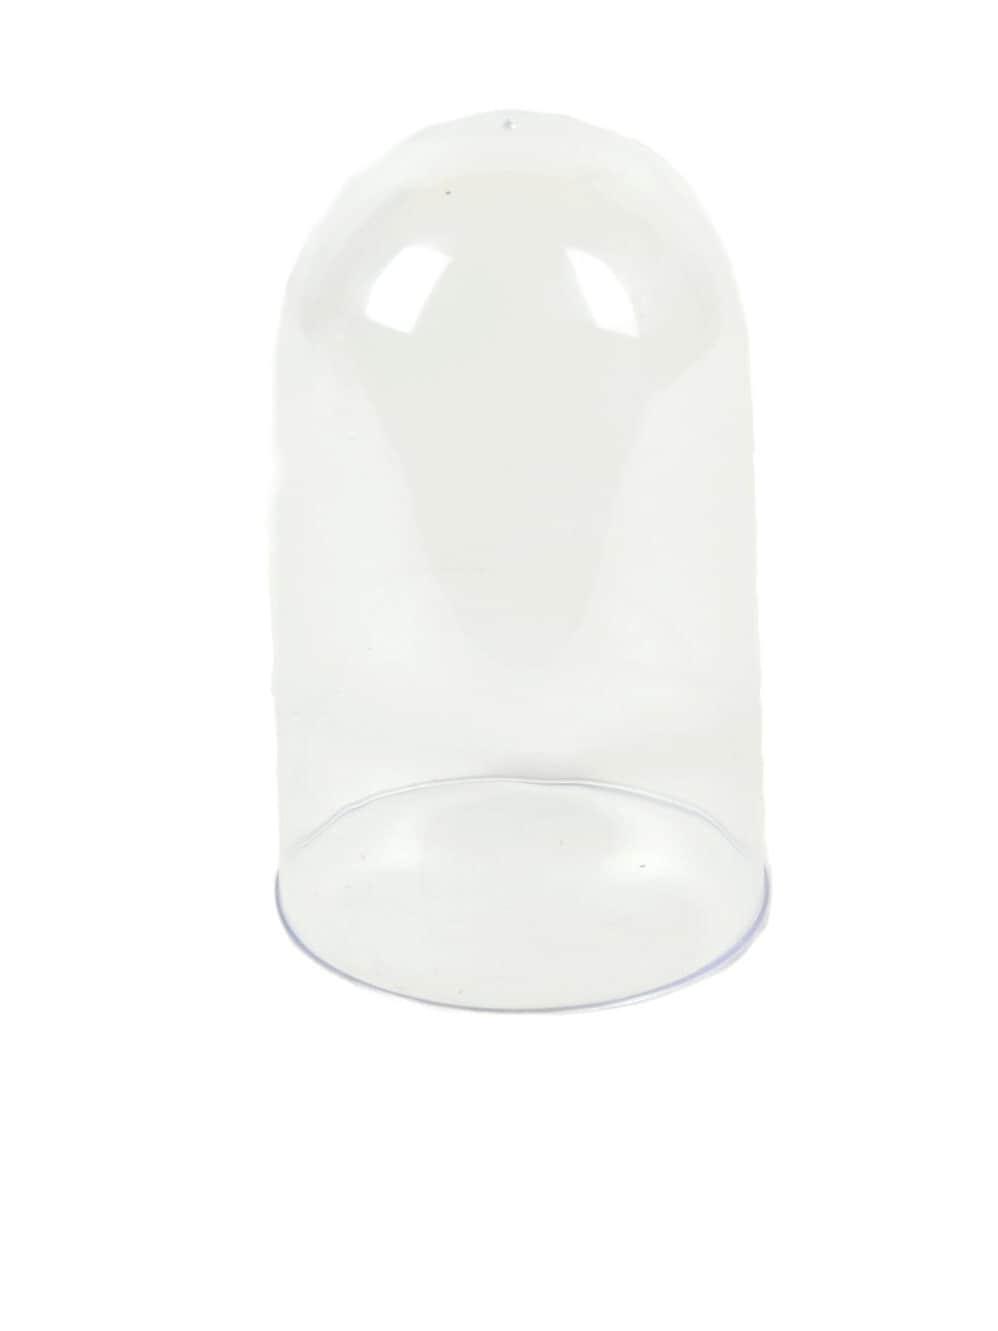 12 Clear Plastic Domes With Snap in Bottom 4 Inches Tall 2-3/8 Diameter 